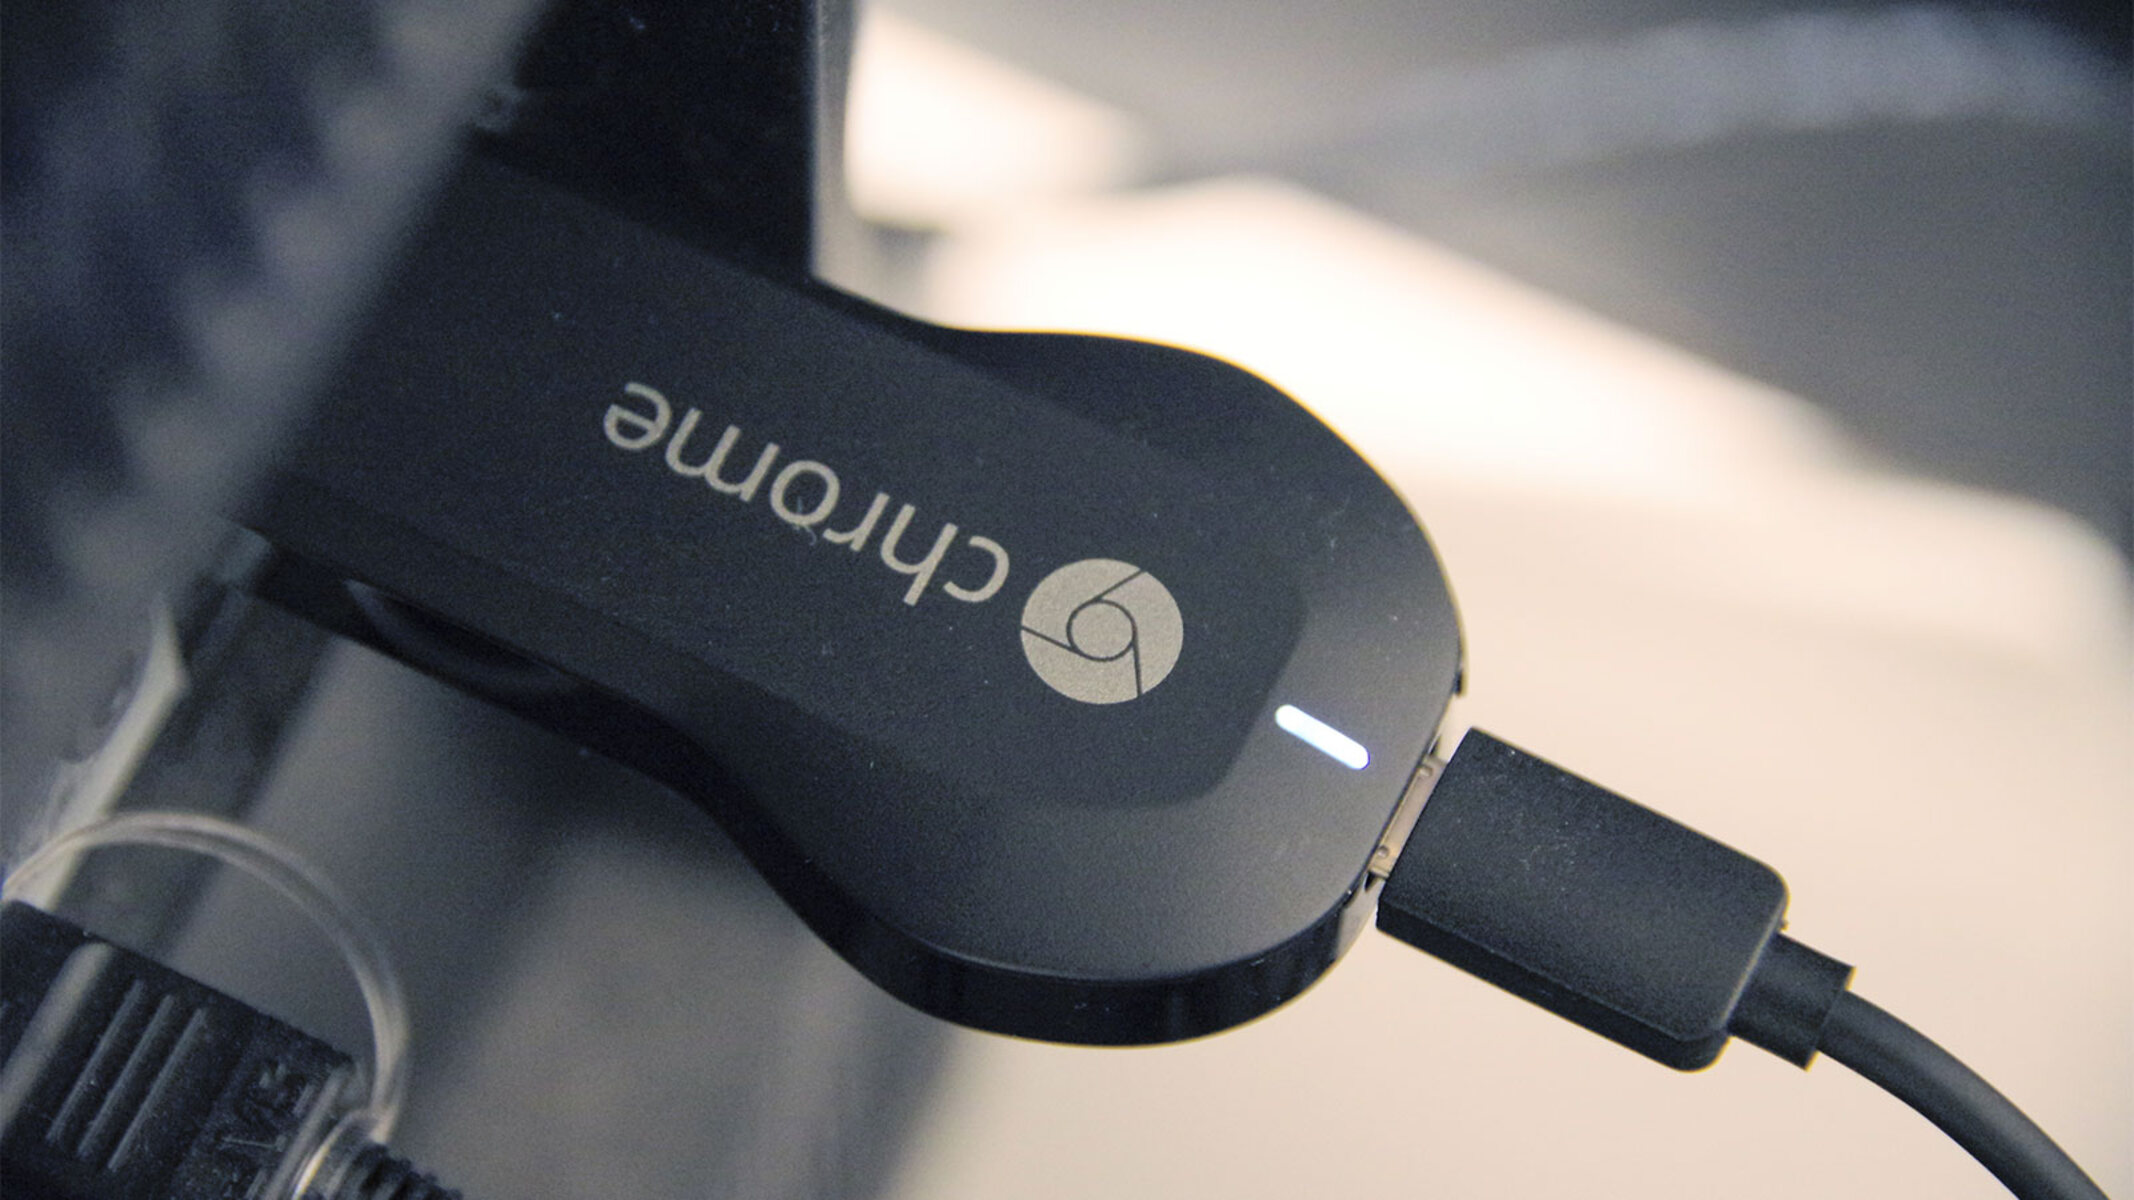 How To Turn Off The Auto Network Switch In Your Wi-Fi Settings On Google Chromecast